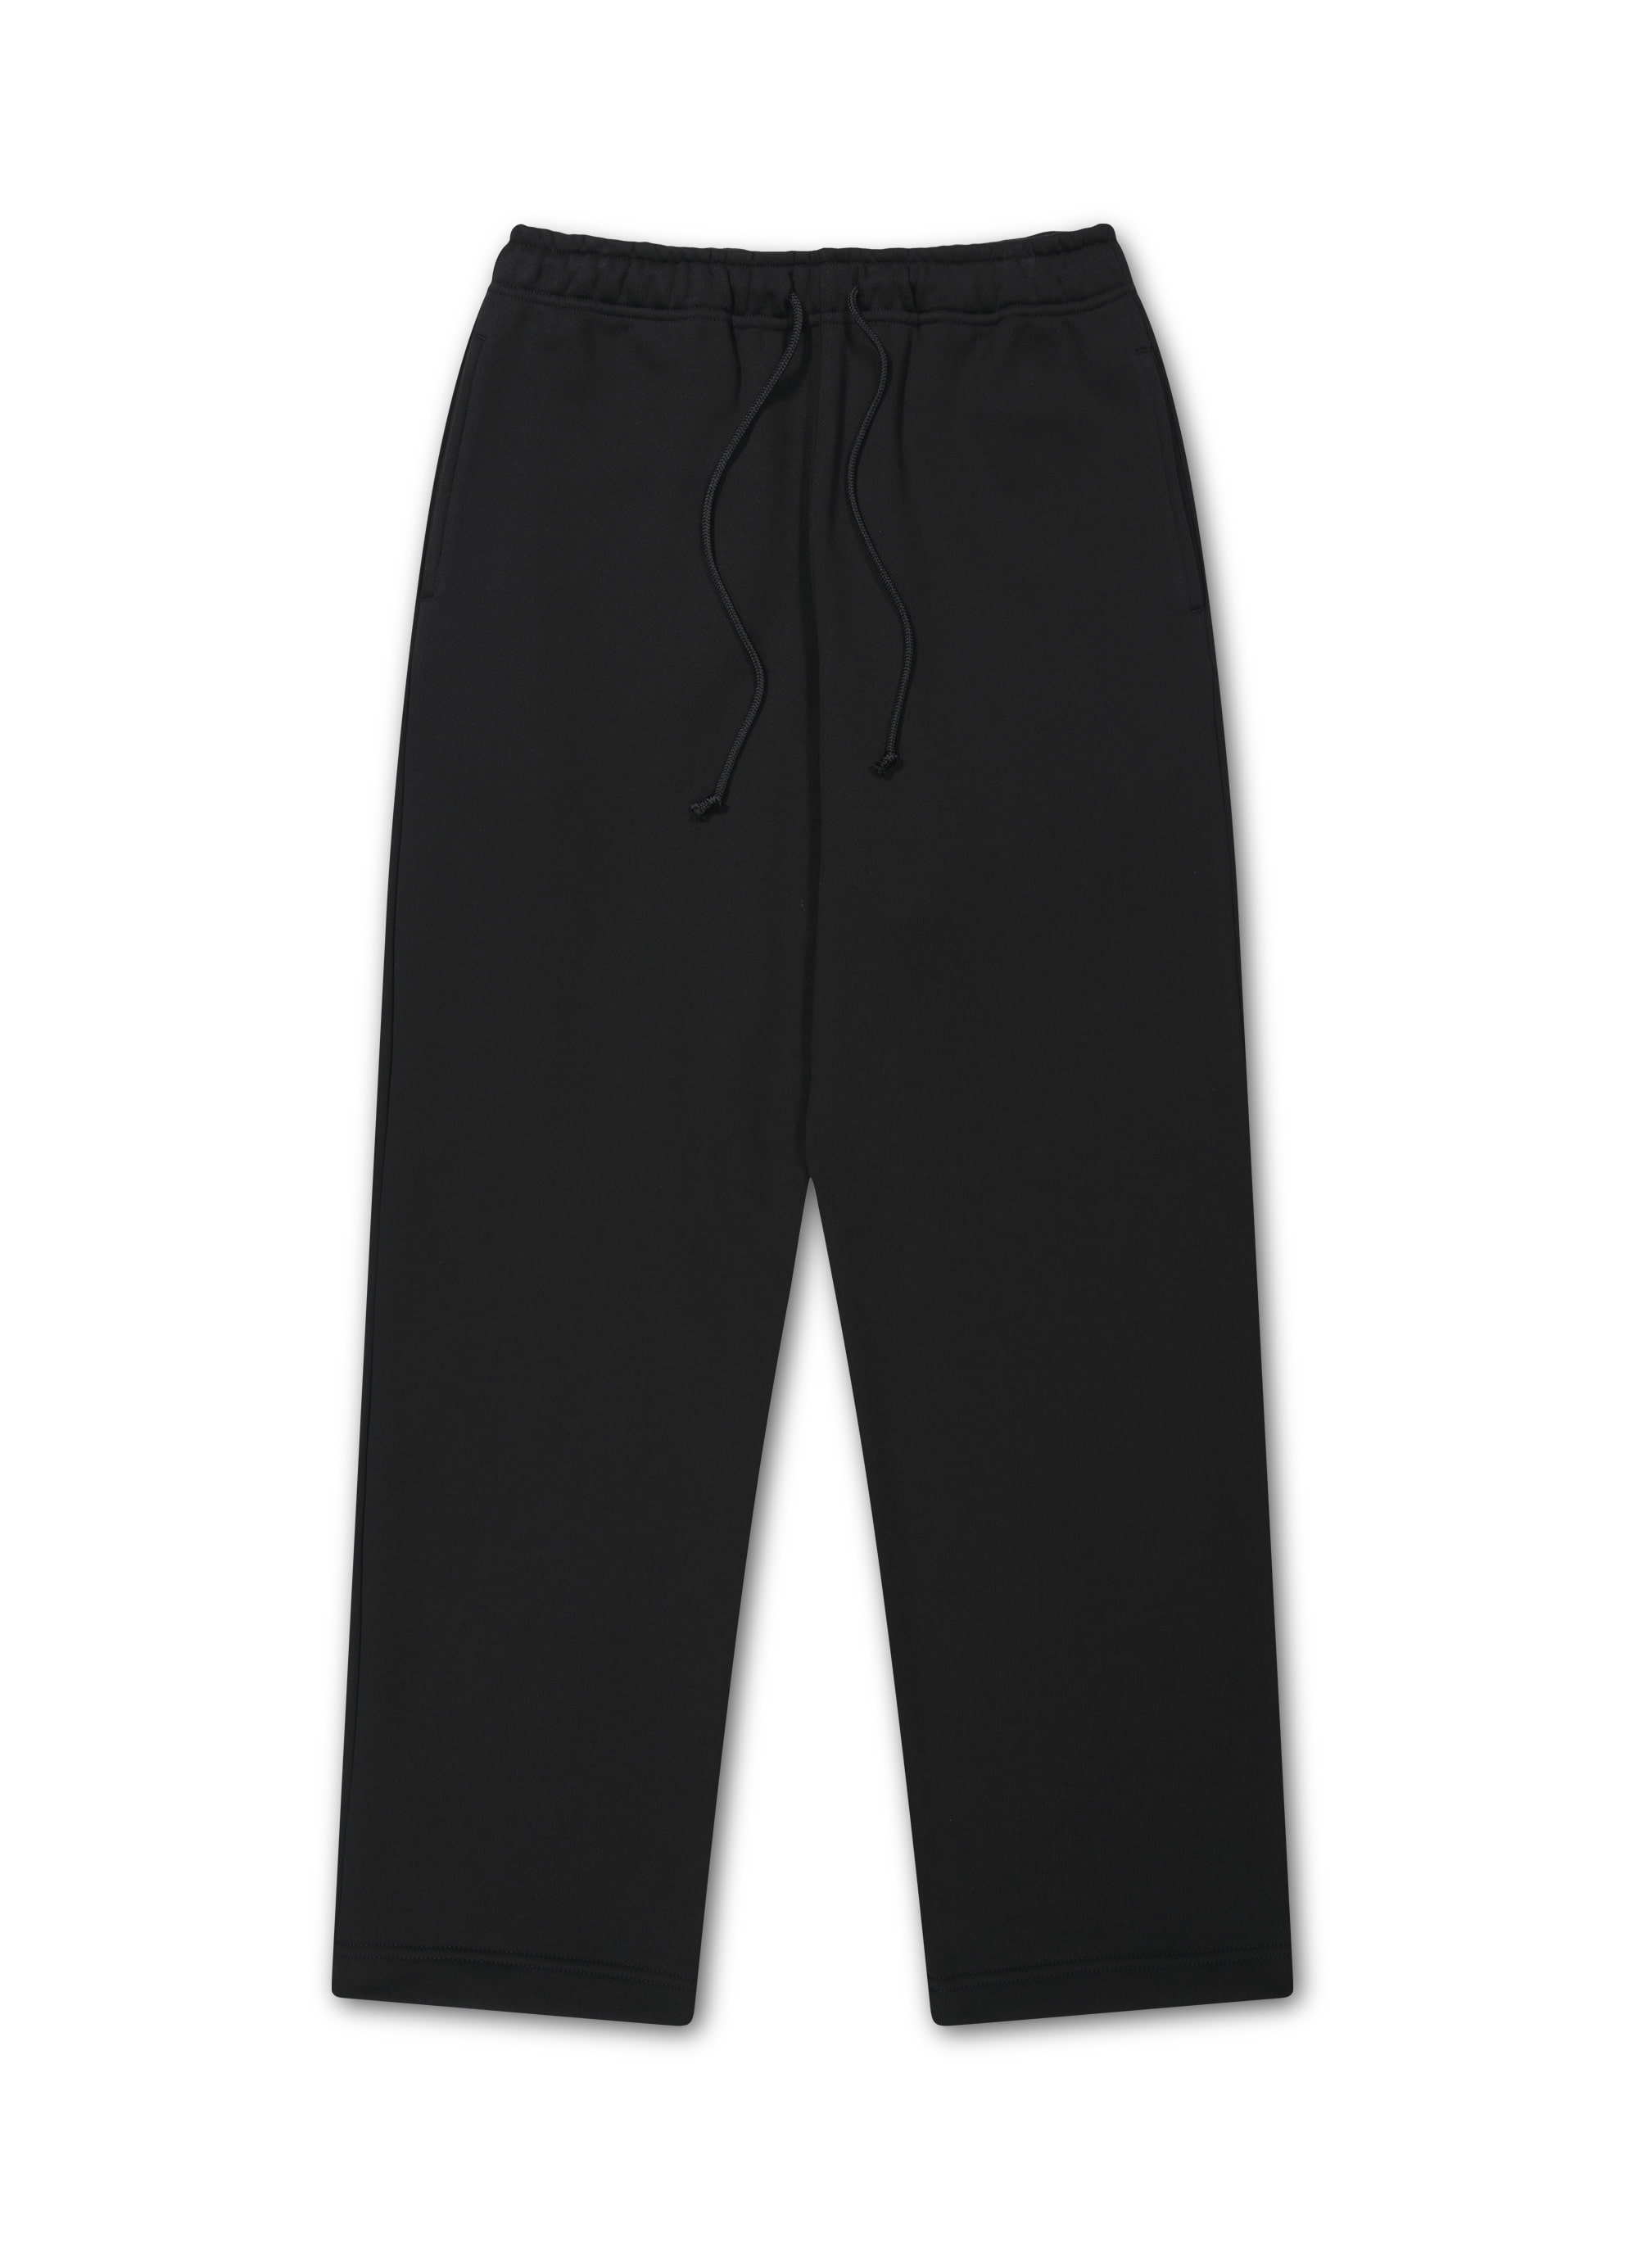 094 HEAVY WEIGHTED SWEATPANTS - BLACK